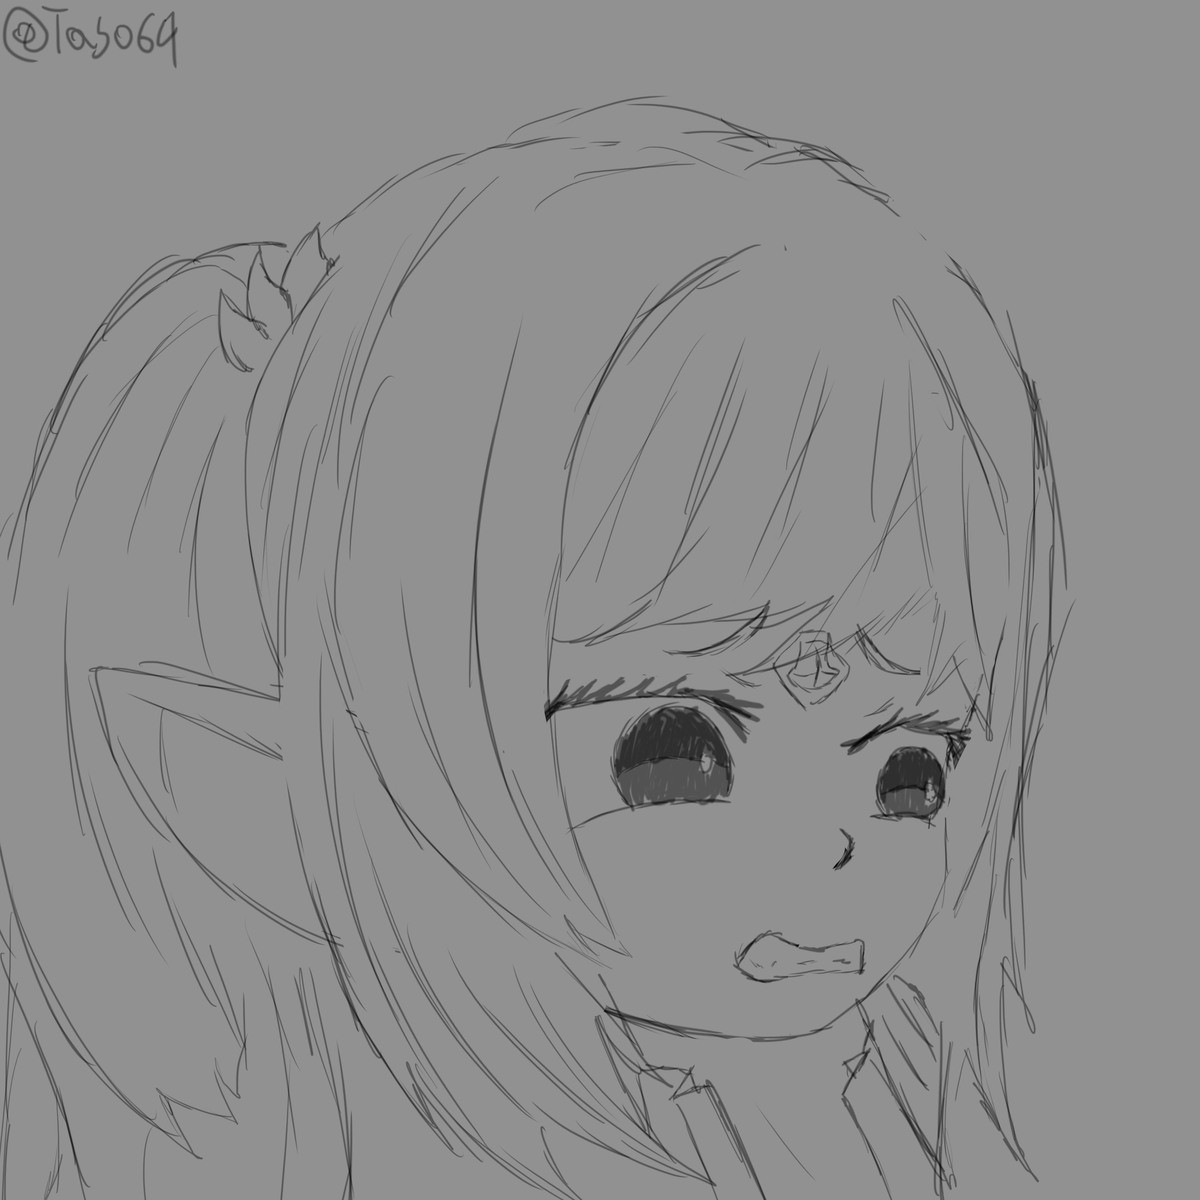 DailyDrawing day 226. multiple. i have been contracted by my friend lynzylu on twtch to draw her stream emotes . she streams FFXIV all the time and atleast once